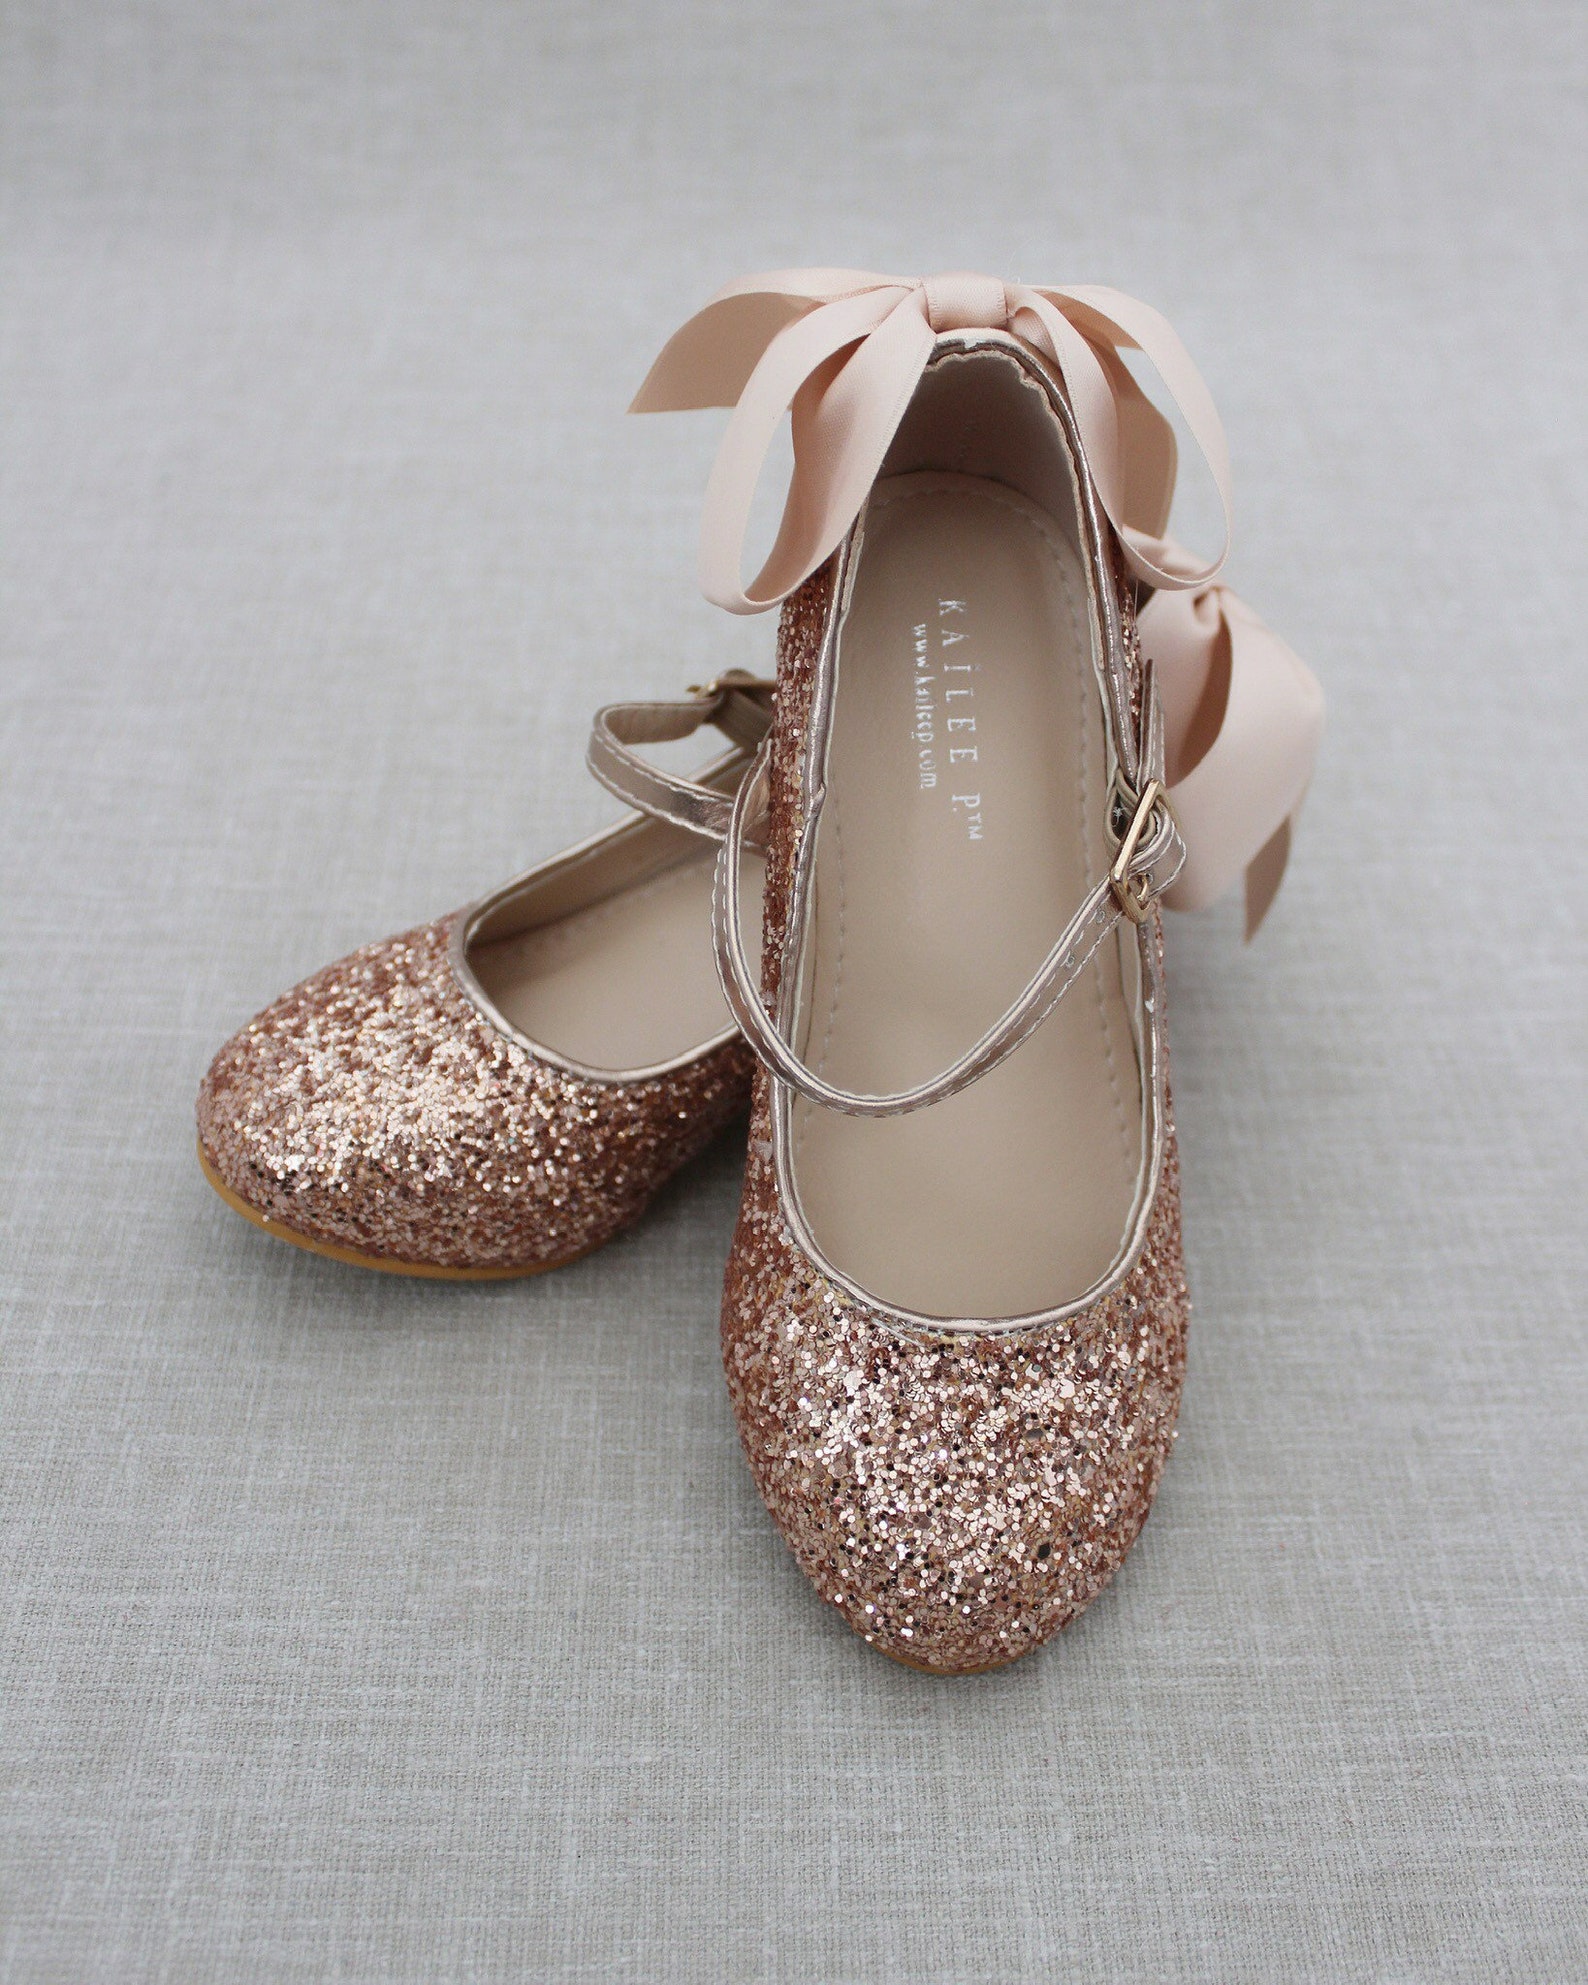 Rose Gold Rock Glitter Mary-jane Heels With Added BLUSH SATIN - Etsy